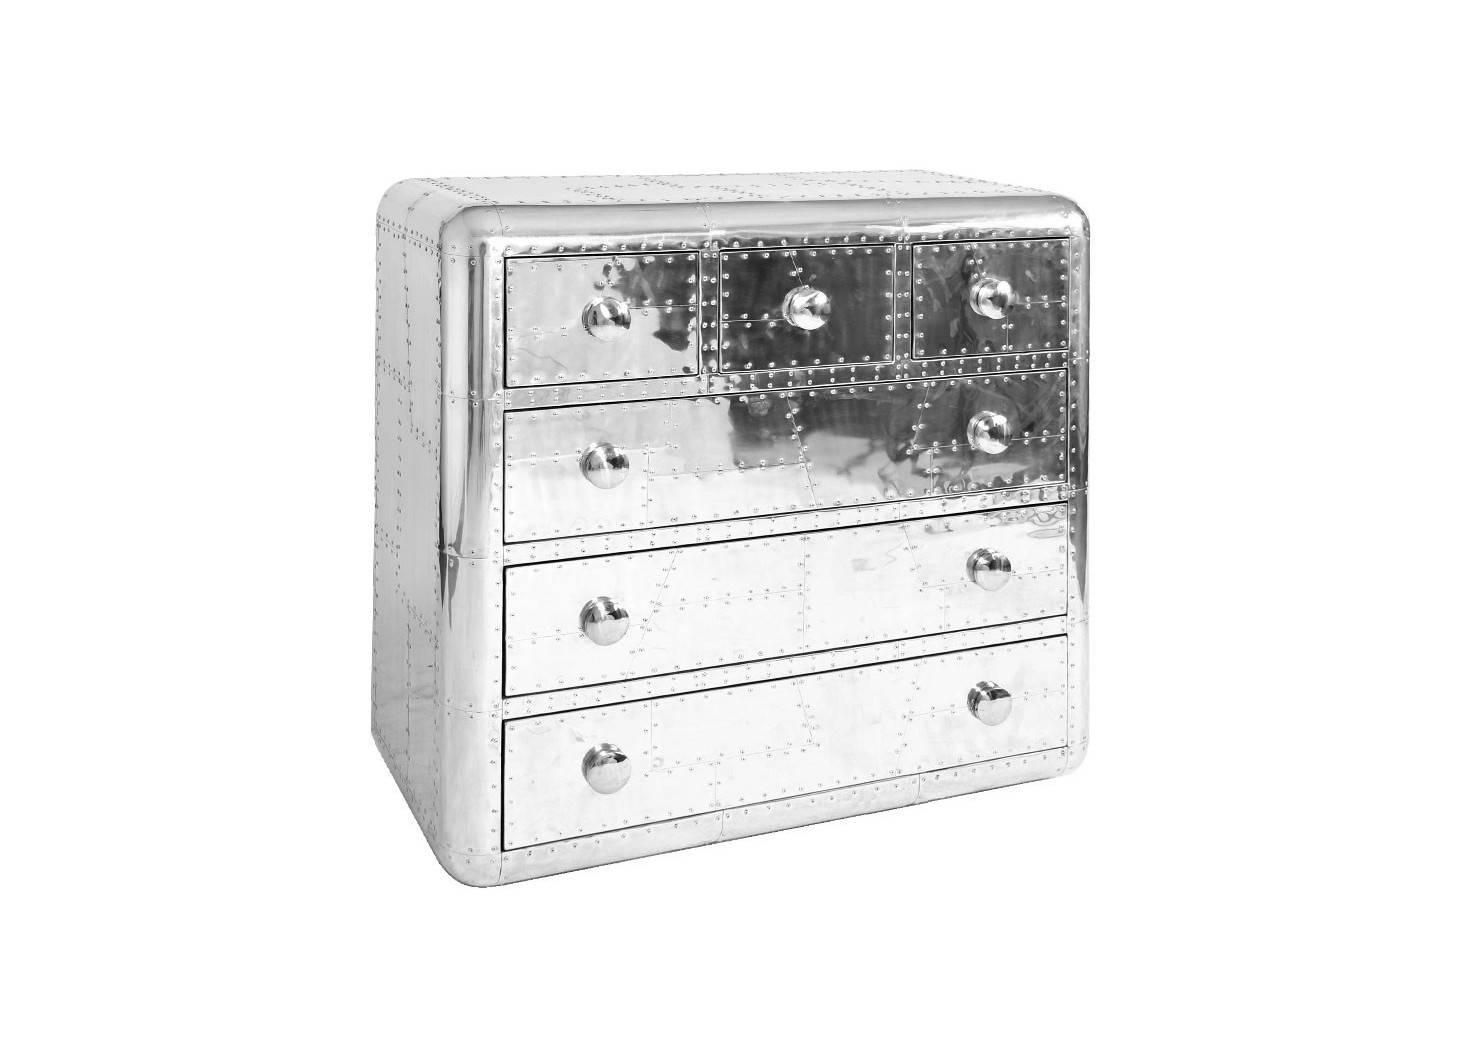 DC3 chest of drawers